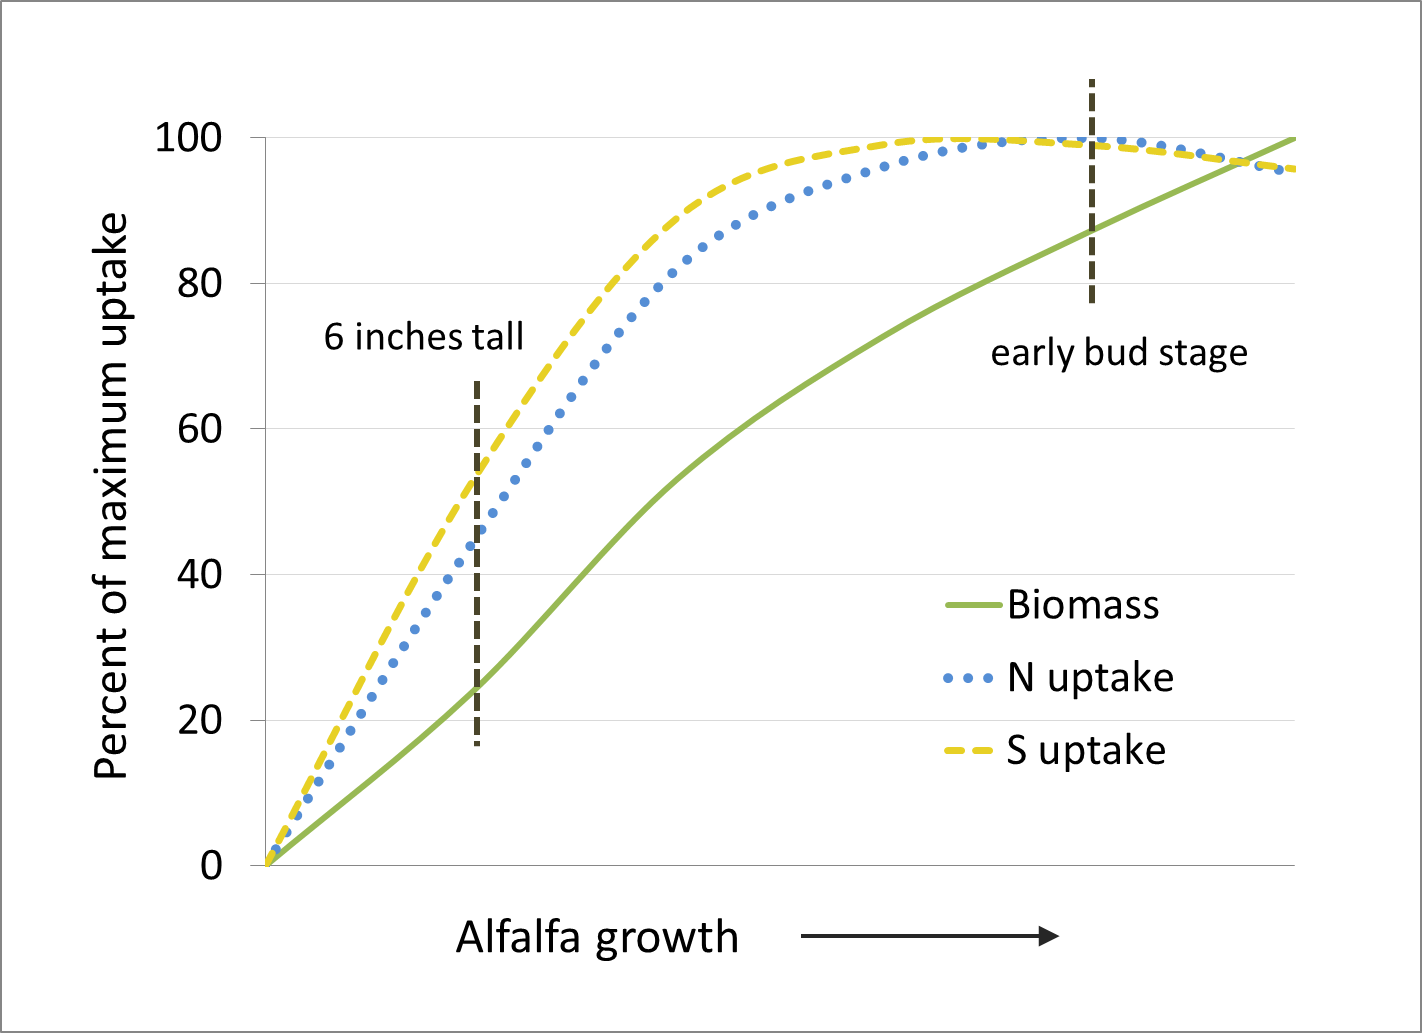 Alfalfa: N and S uptake occur at high rates initially and reach their maximums shortly before early bud stage.